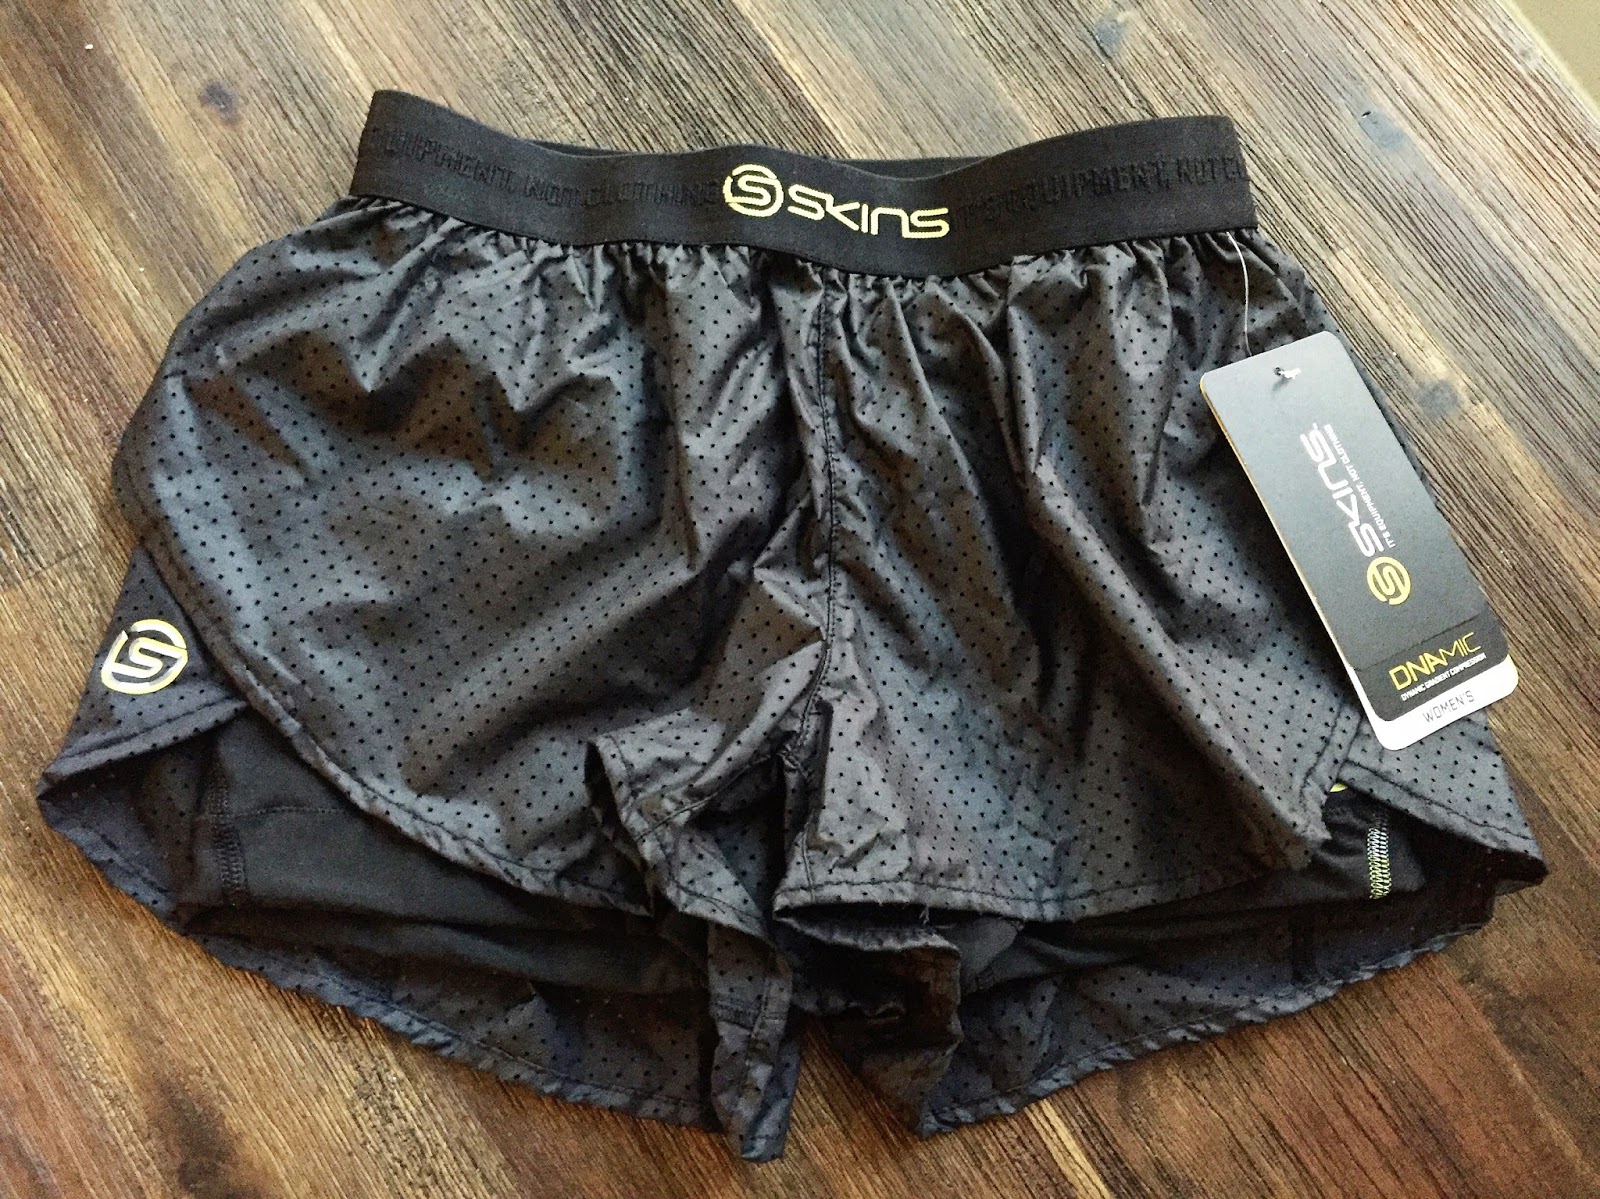 Run-Hike-Play: SKINS DNAmic Women's Superpose Compression Shorts Review &  Giveaway